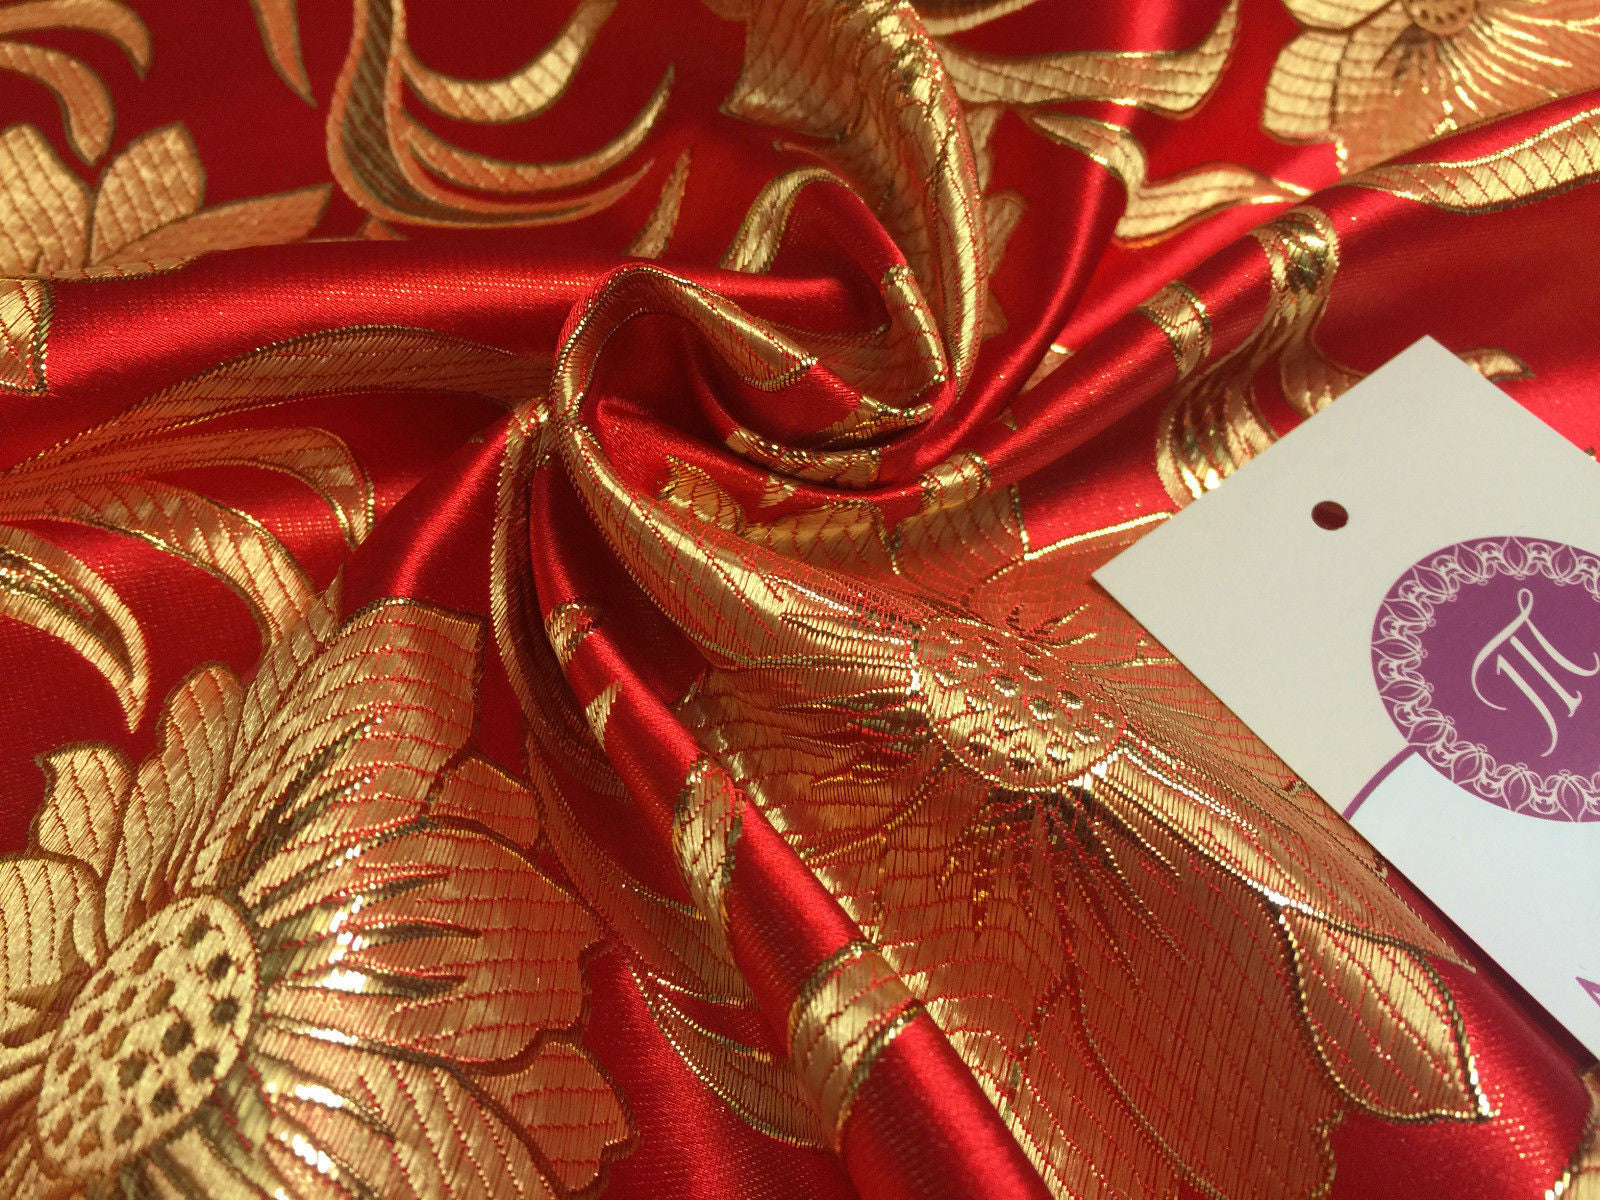 Red and gold floral Metallic jacquard brocade Fabric 58" Wide M380 Mtex - Midland Textiles & Fabric